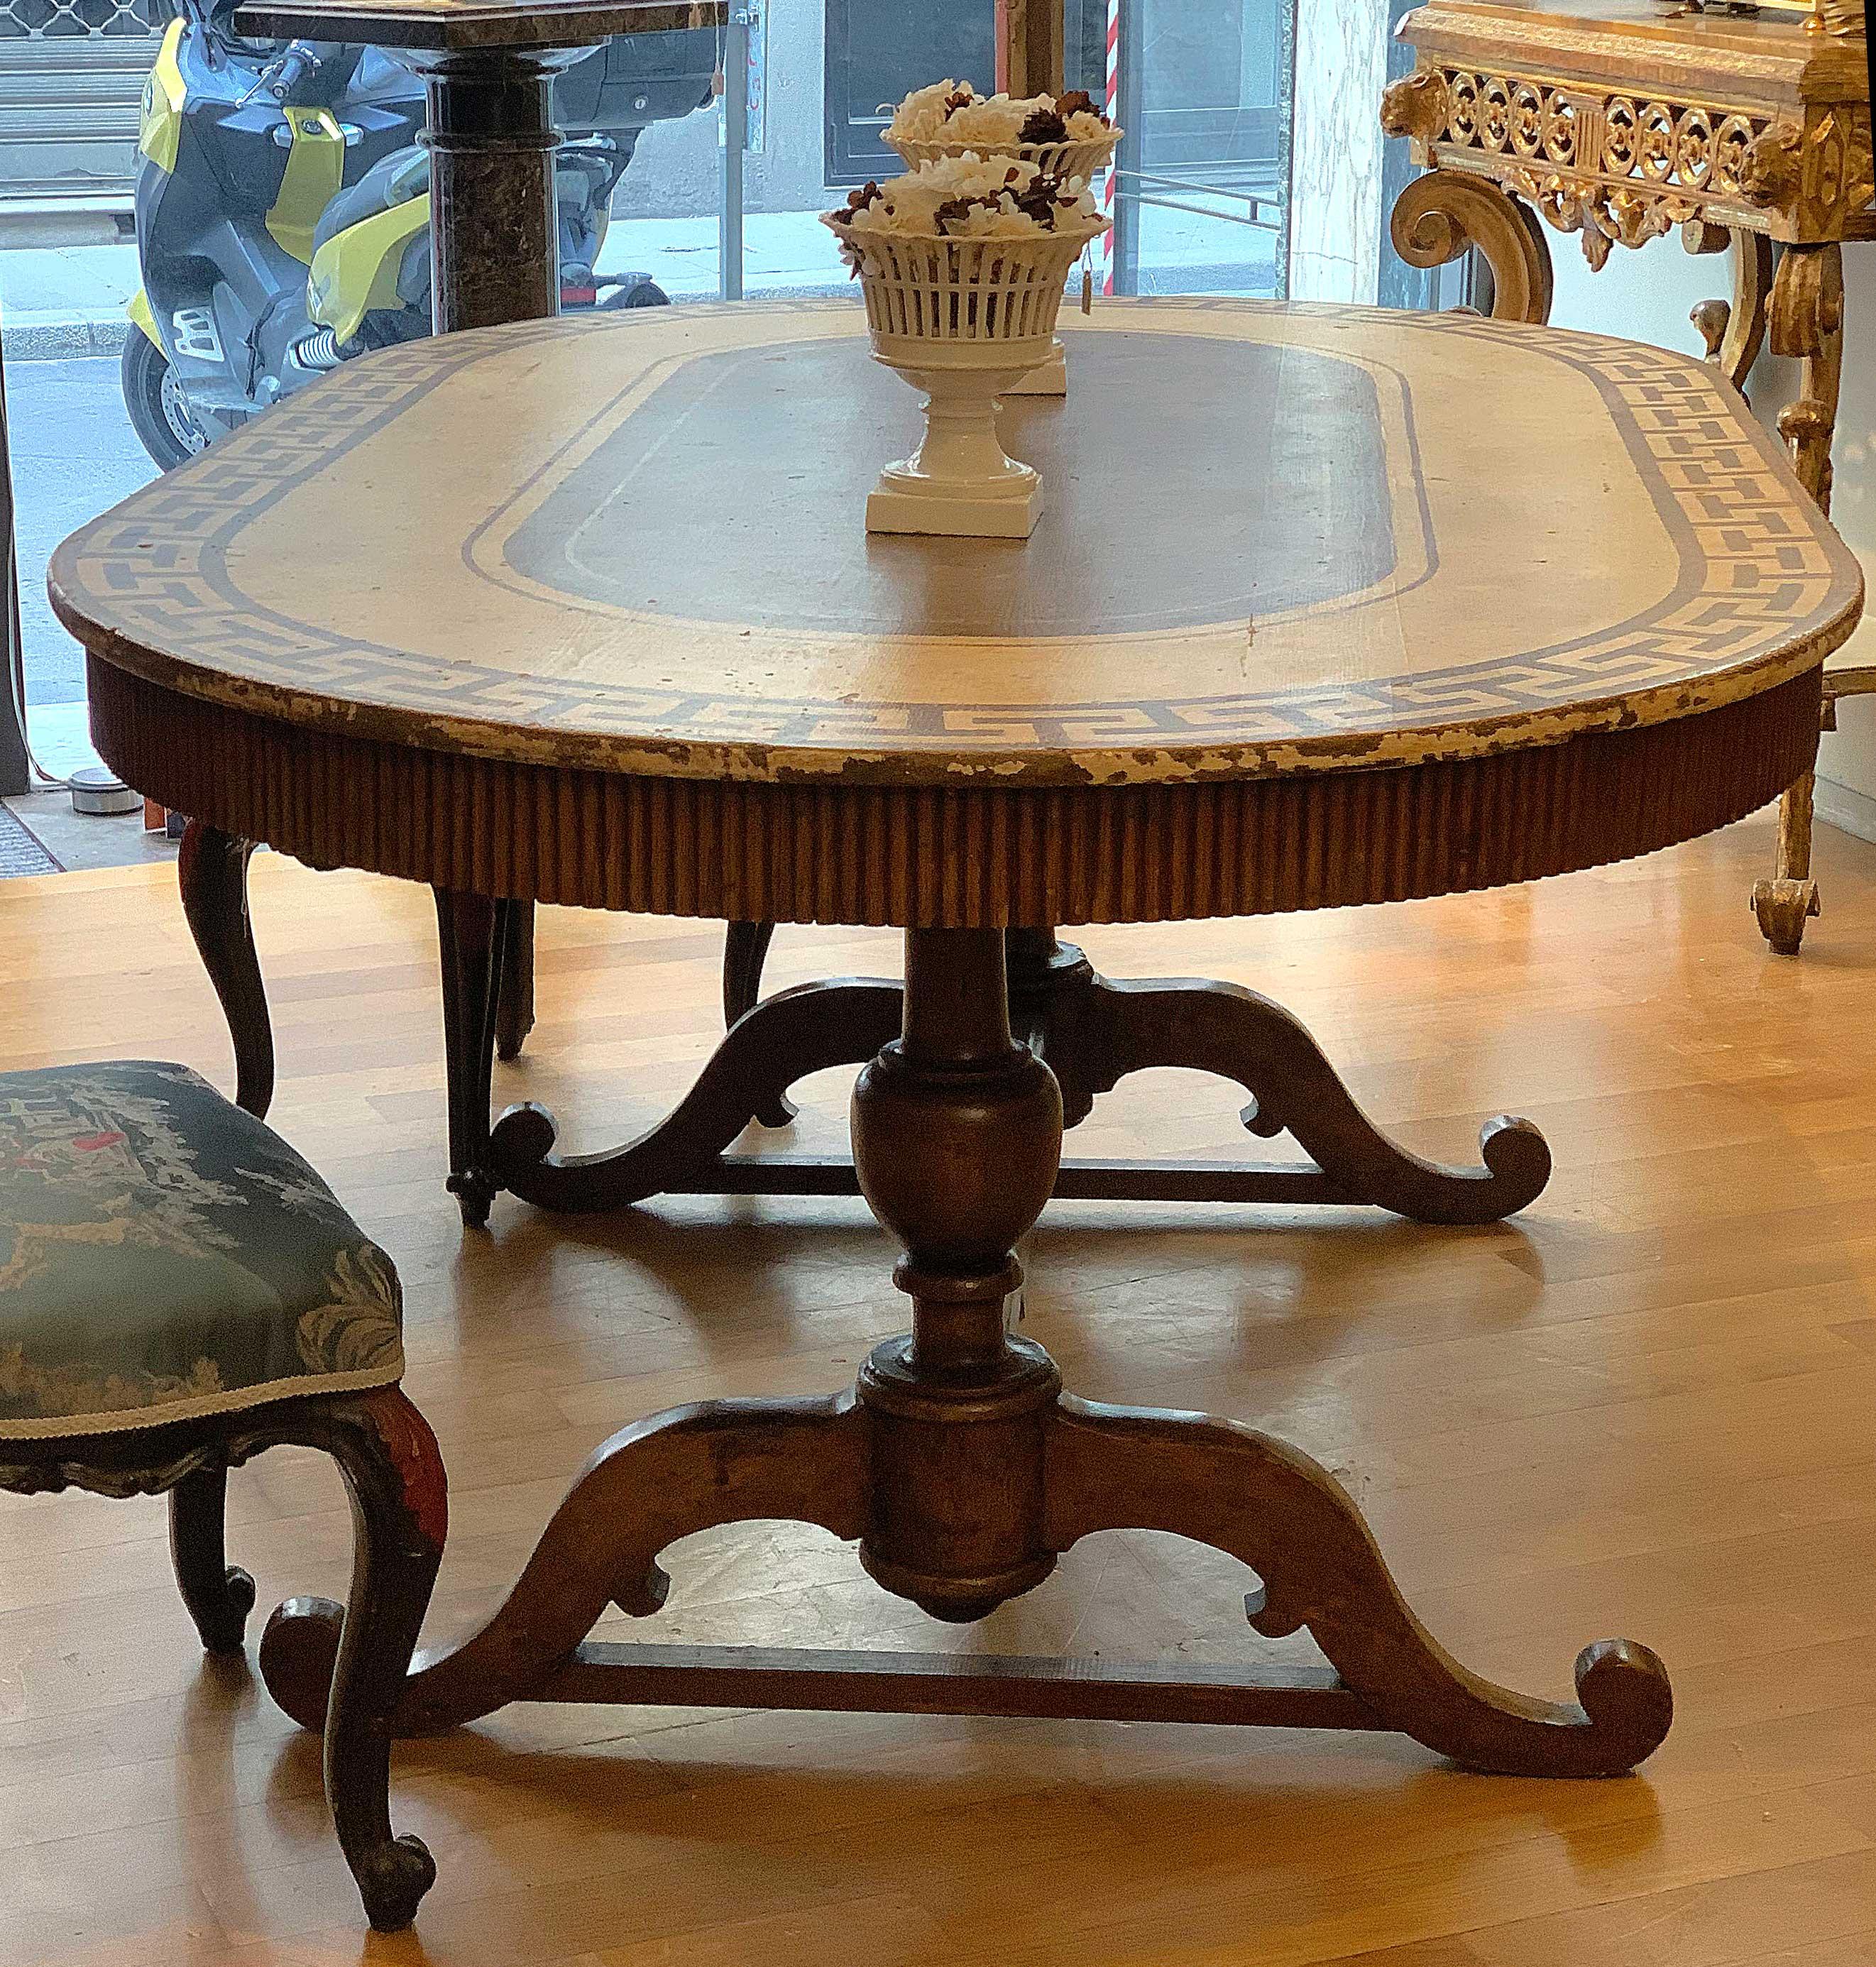 Beautiful neoclassical table with base in walnut formed by two amphorae joined by a crossbar, top in spruce wood painted with lean tempera with paraffin finish. It recalls the English neoclassical style and belongs to some Tuscan cabinet makers who